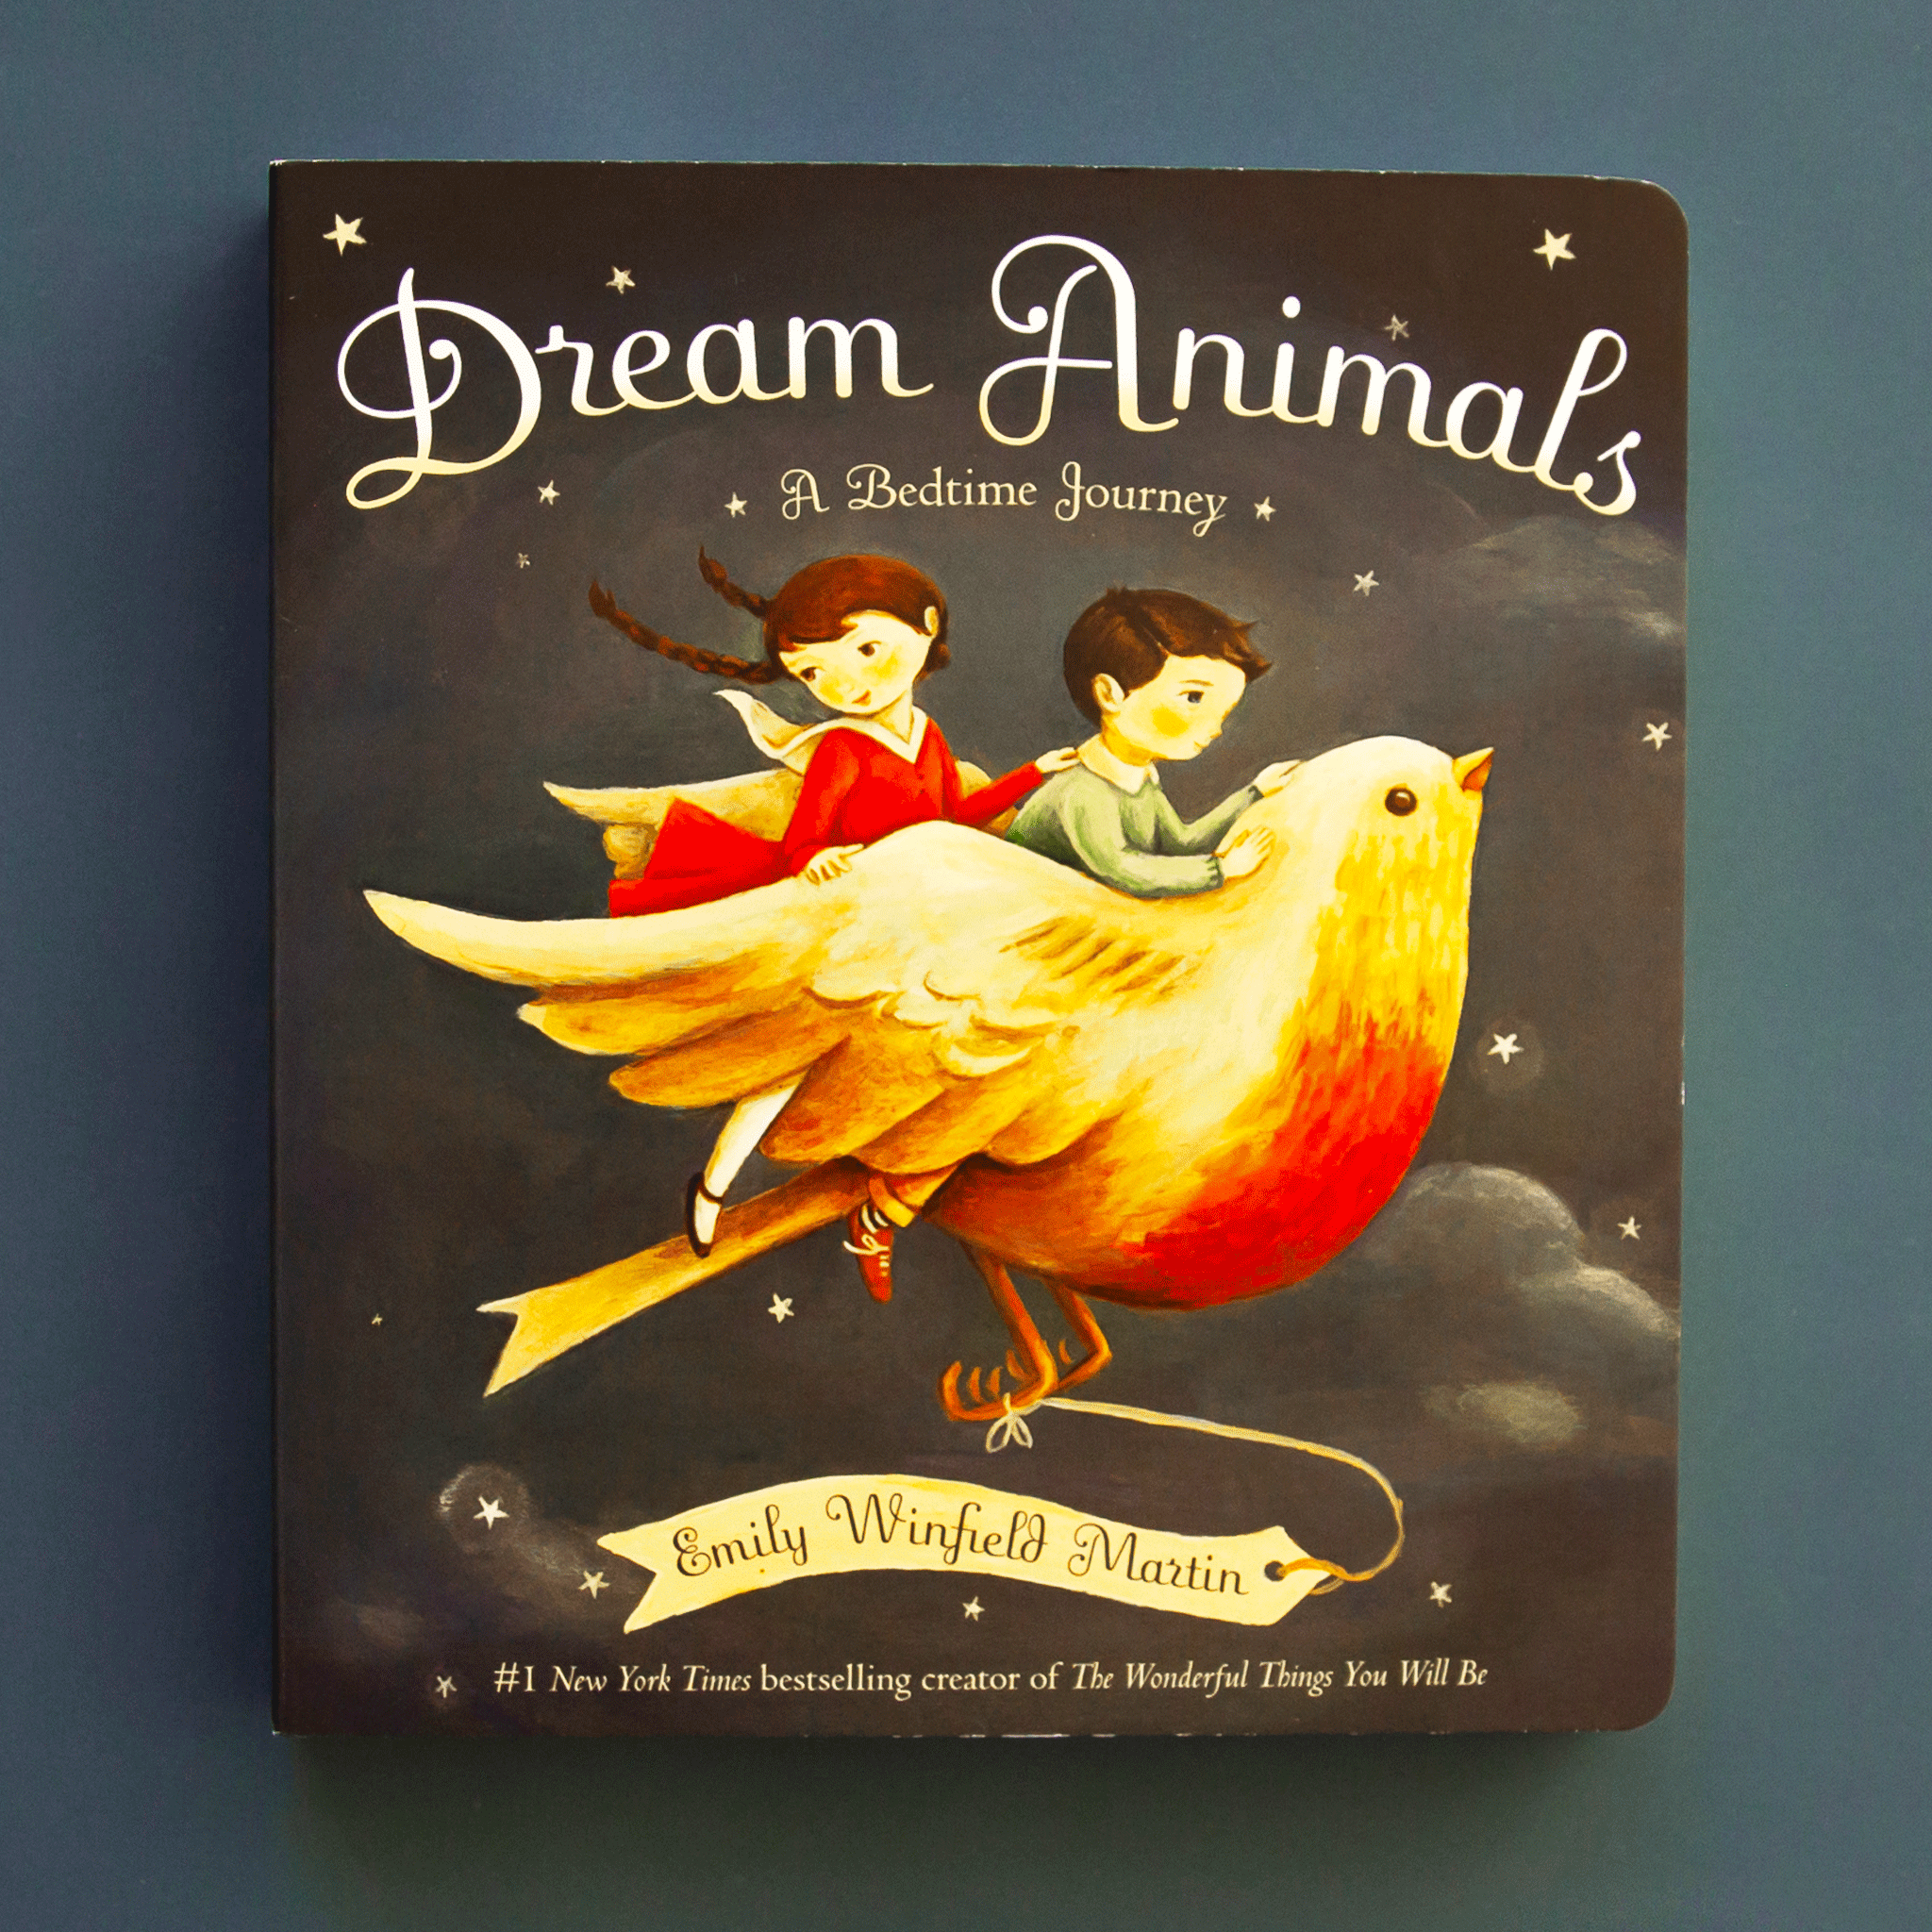 A dark blue/gray book cover with the title, "Dream Animals: A Bedtime Journey" along with an illustration of two children riding a bird through the night sky.